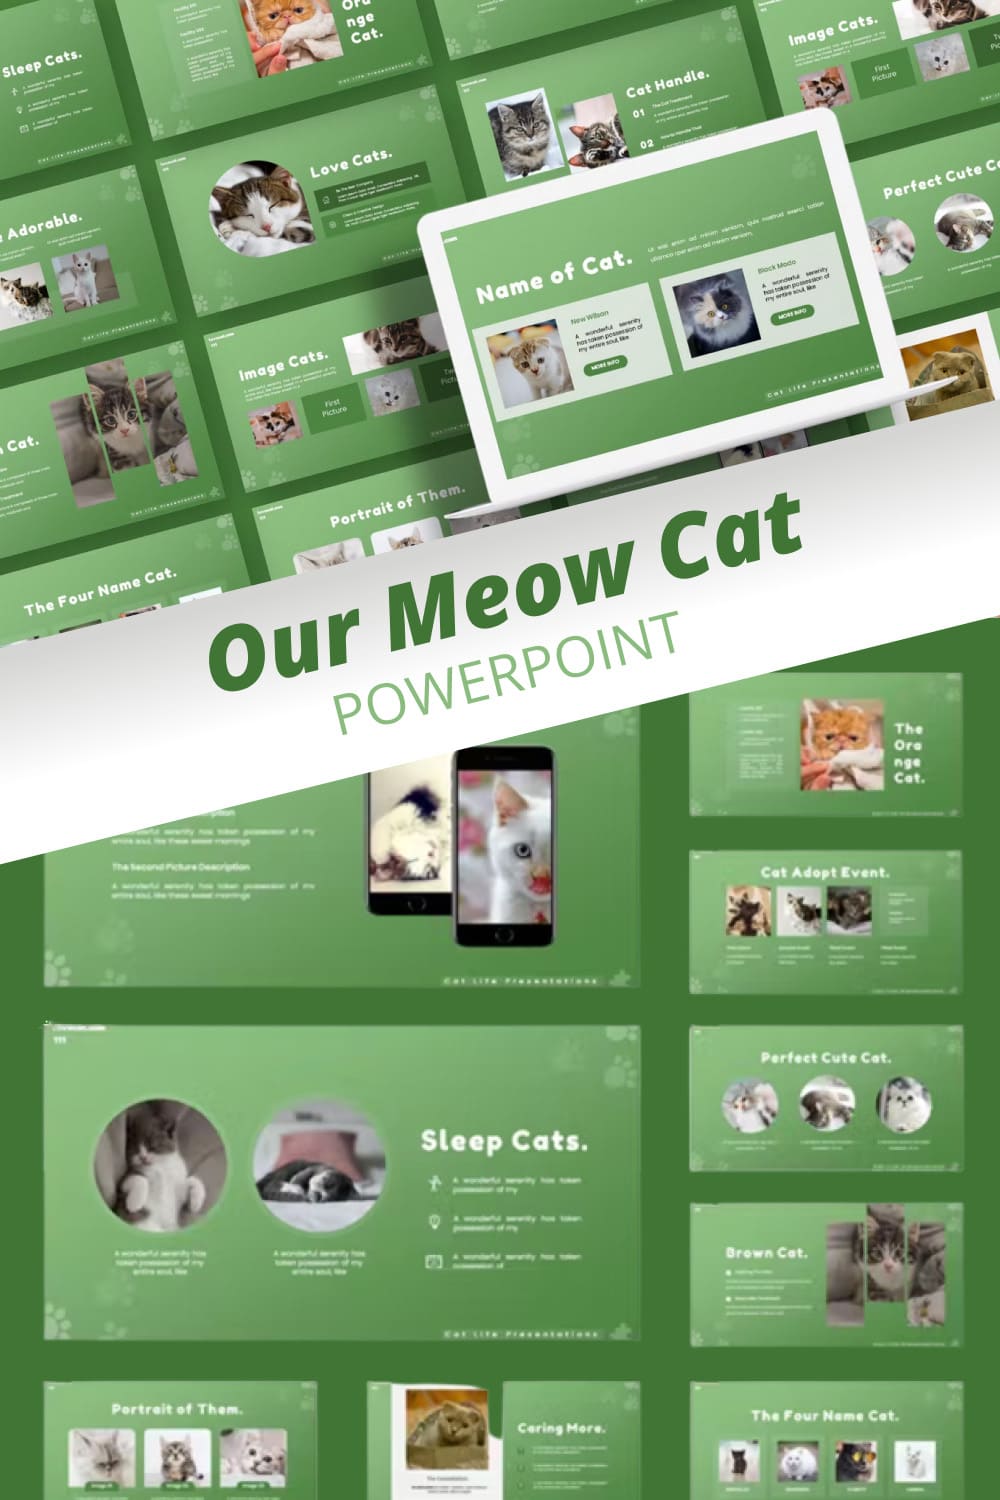 Our meow cat powerpoint template - pinterest image preview.